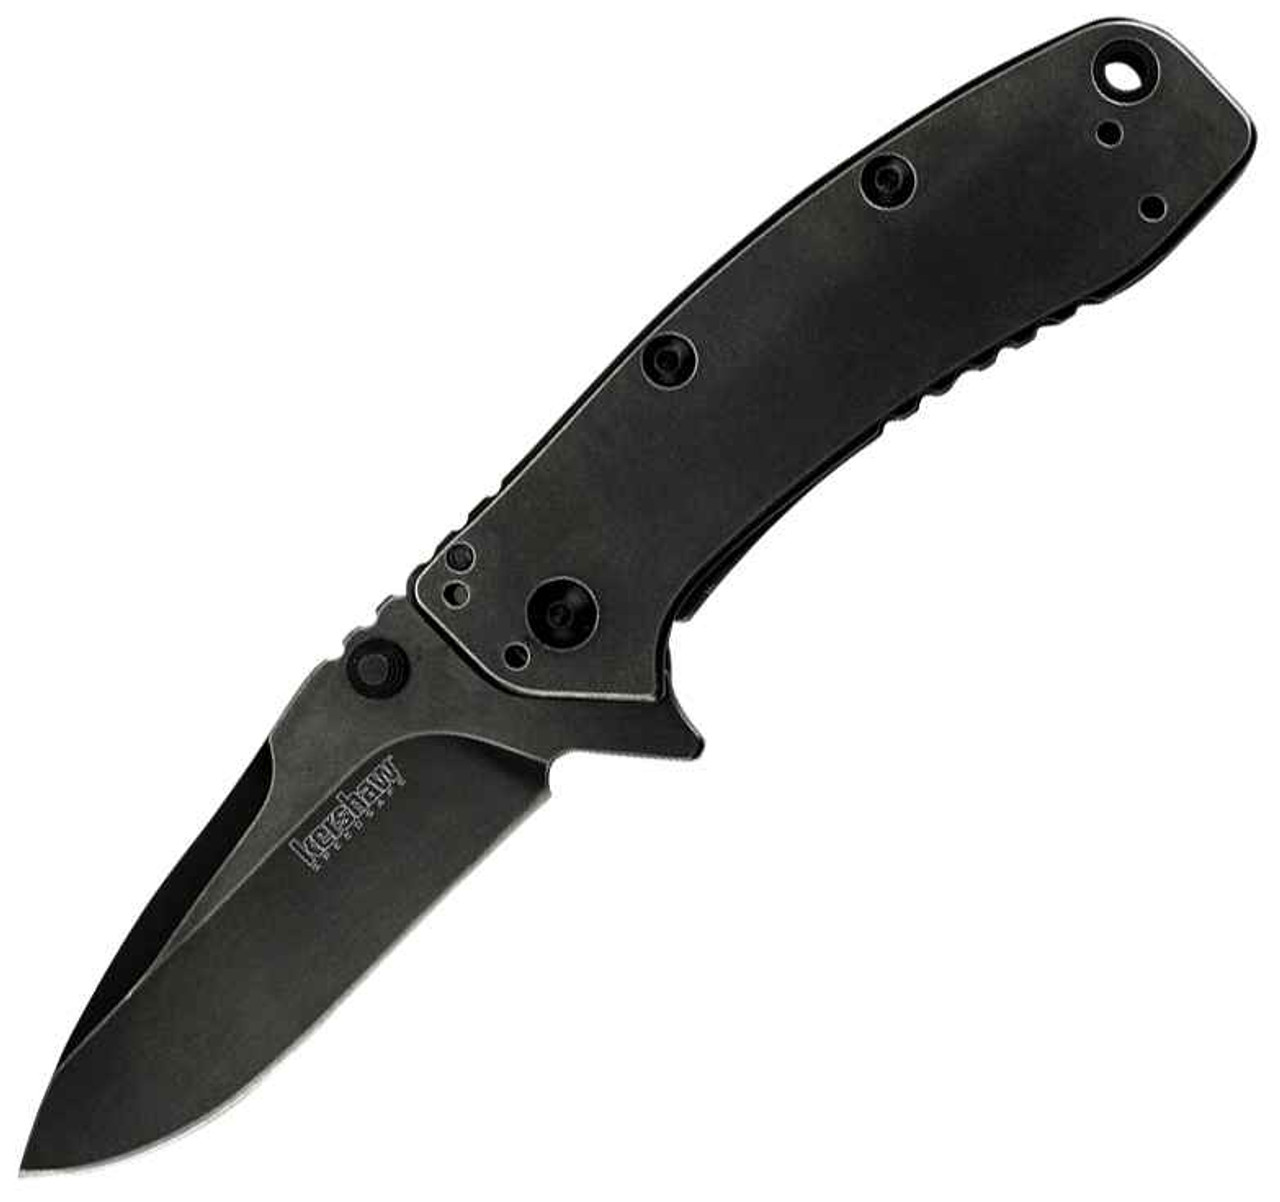 Kershaw Cryo II Assisted Opening Knife (1556BW)- 3.25" Blackwashed 8Cr13MoV Drop Point Blade, Blackwashed Stainless Steel Handle